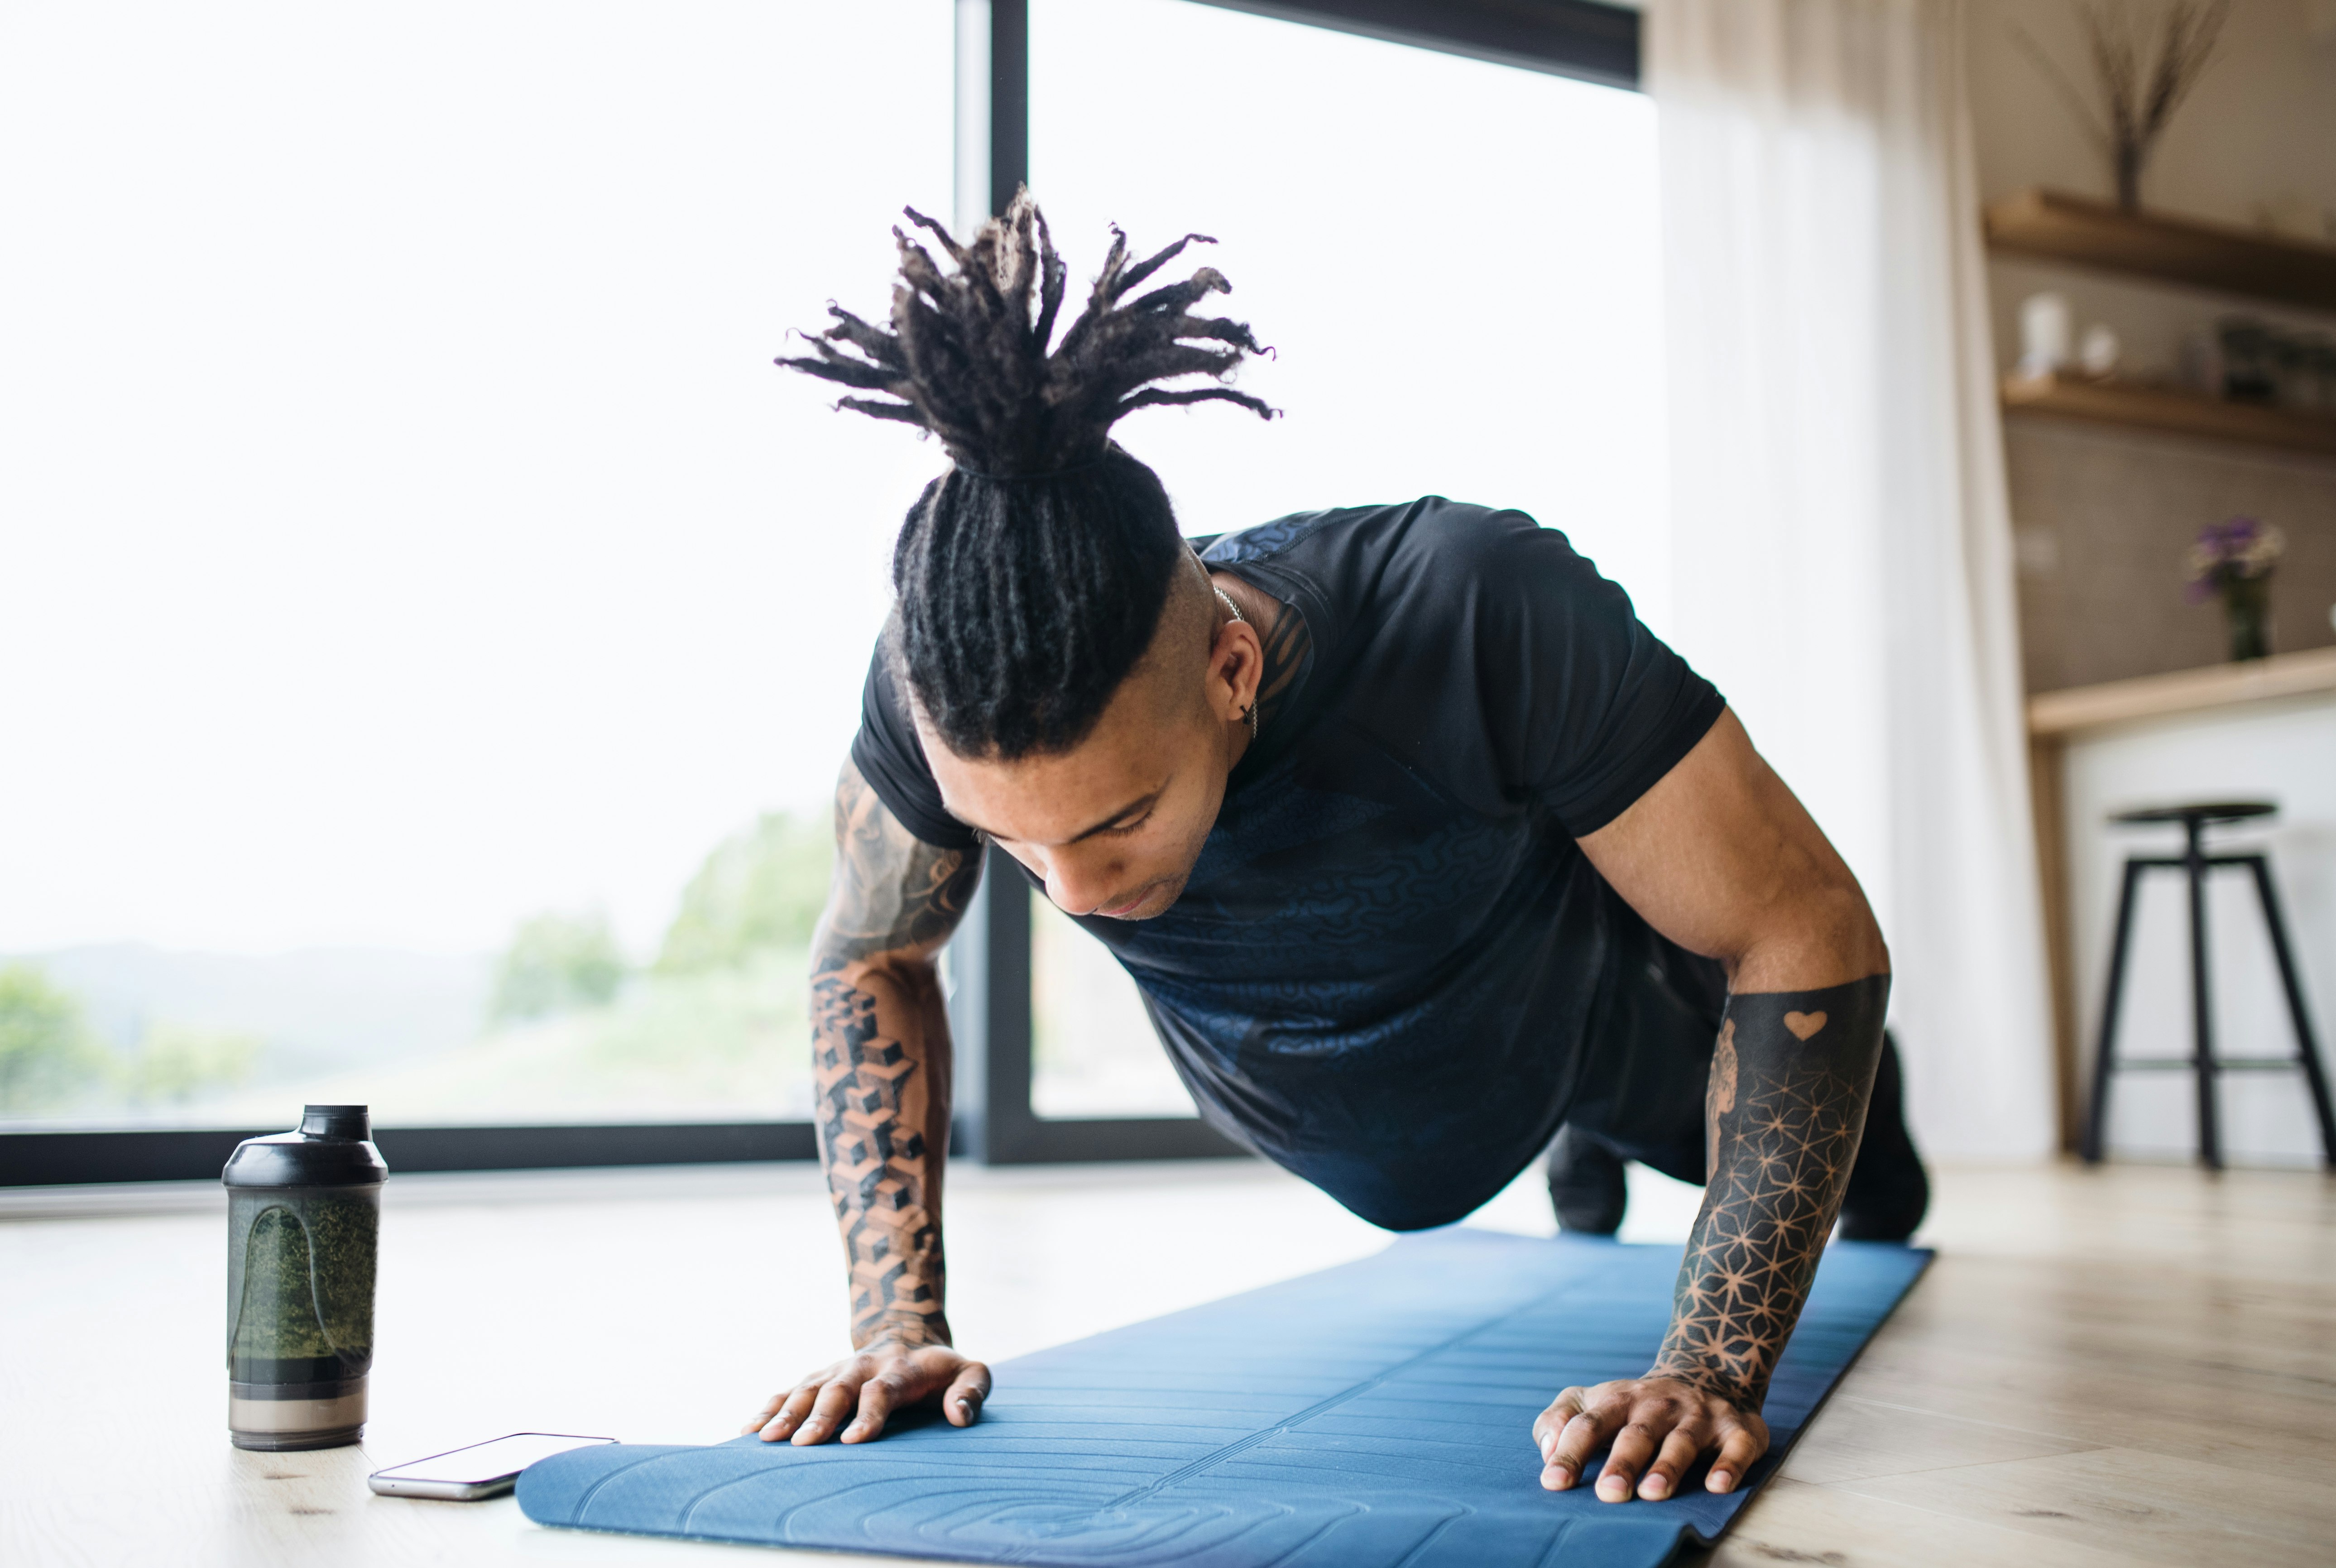 A man with dreads in a yoga pose